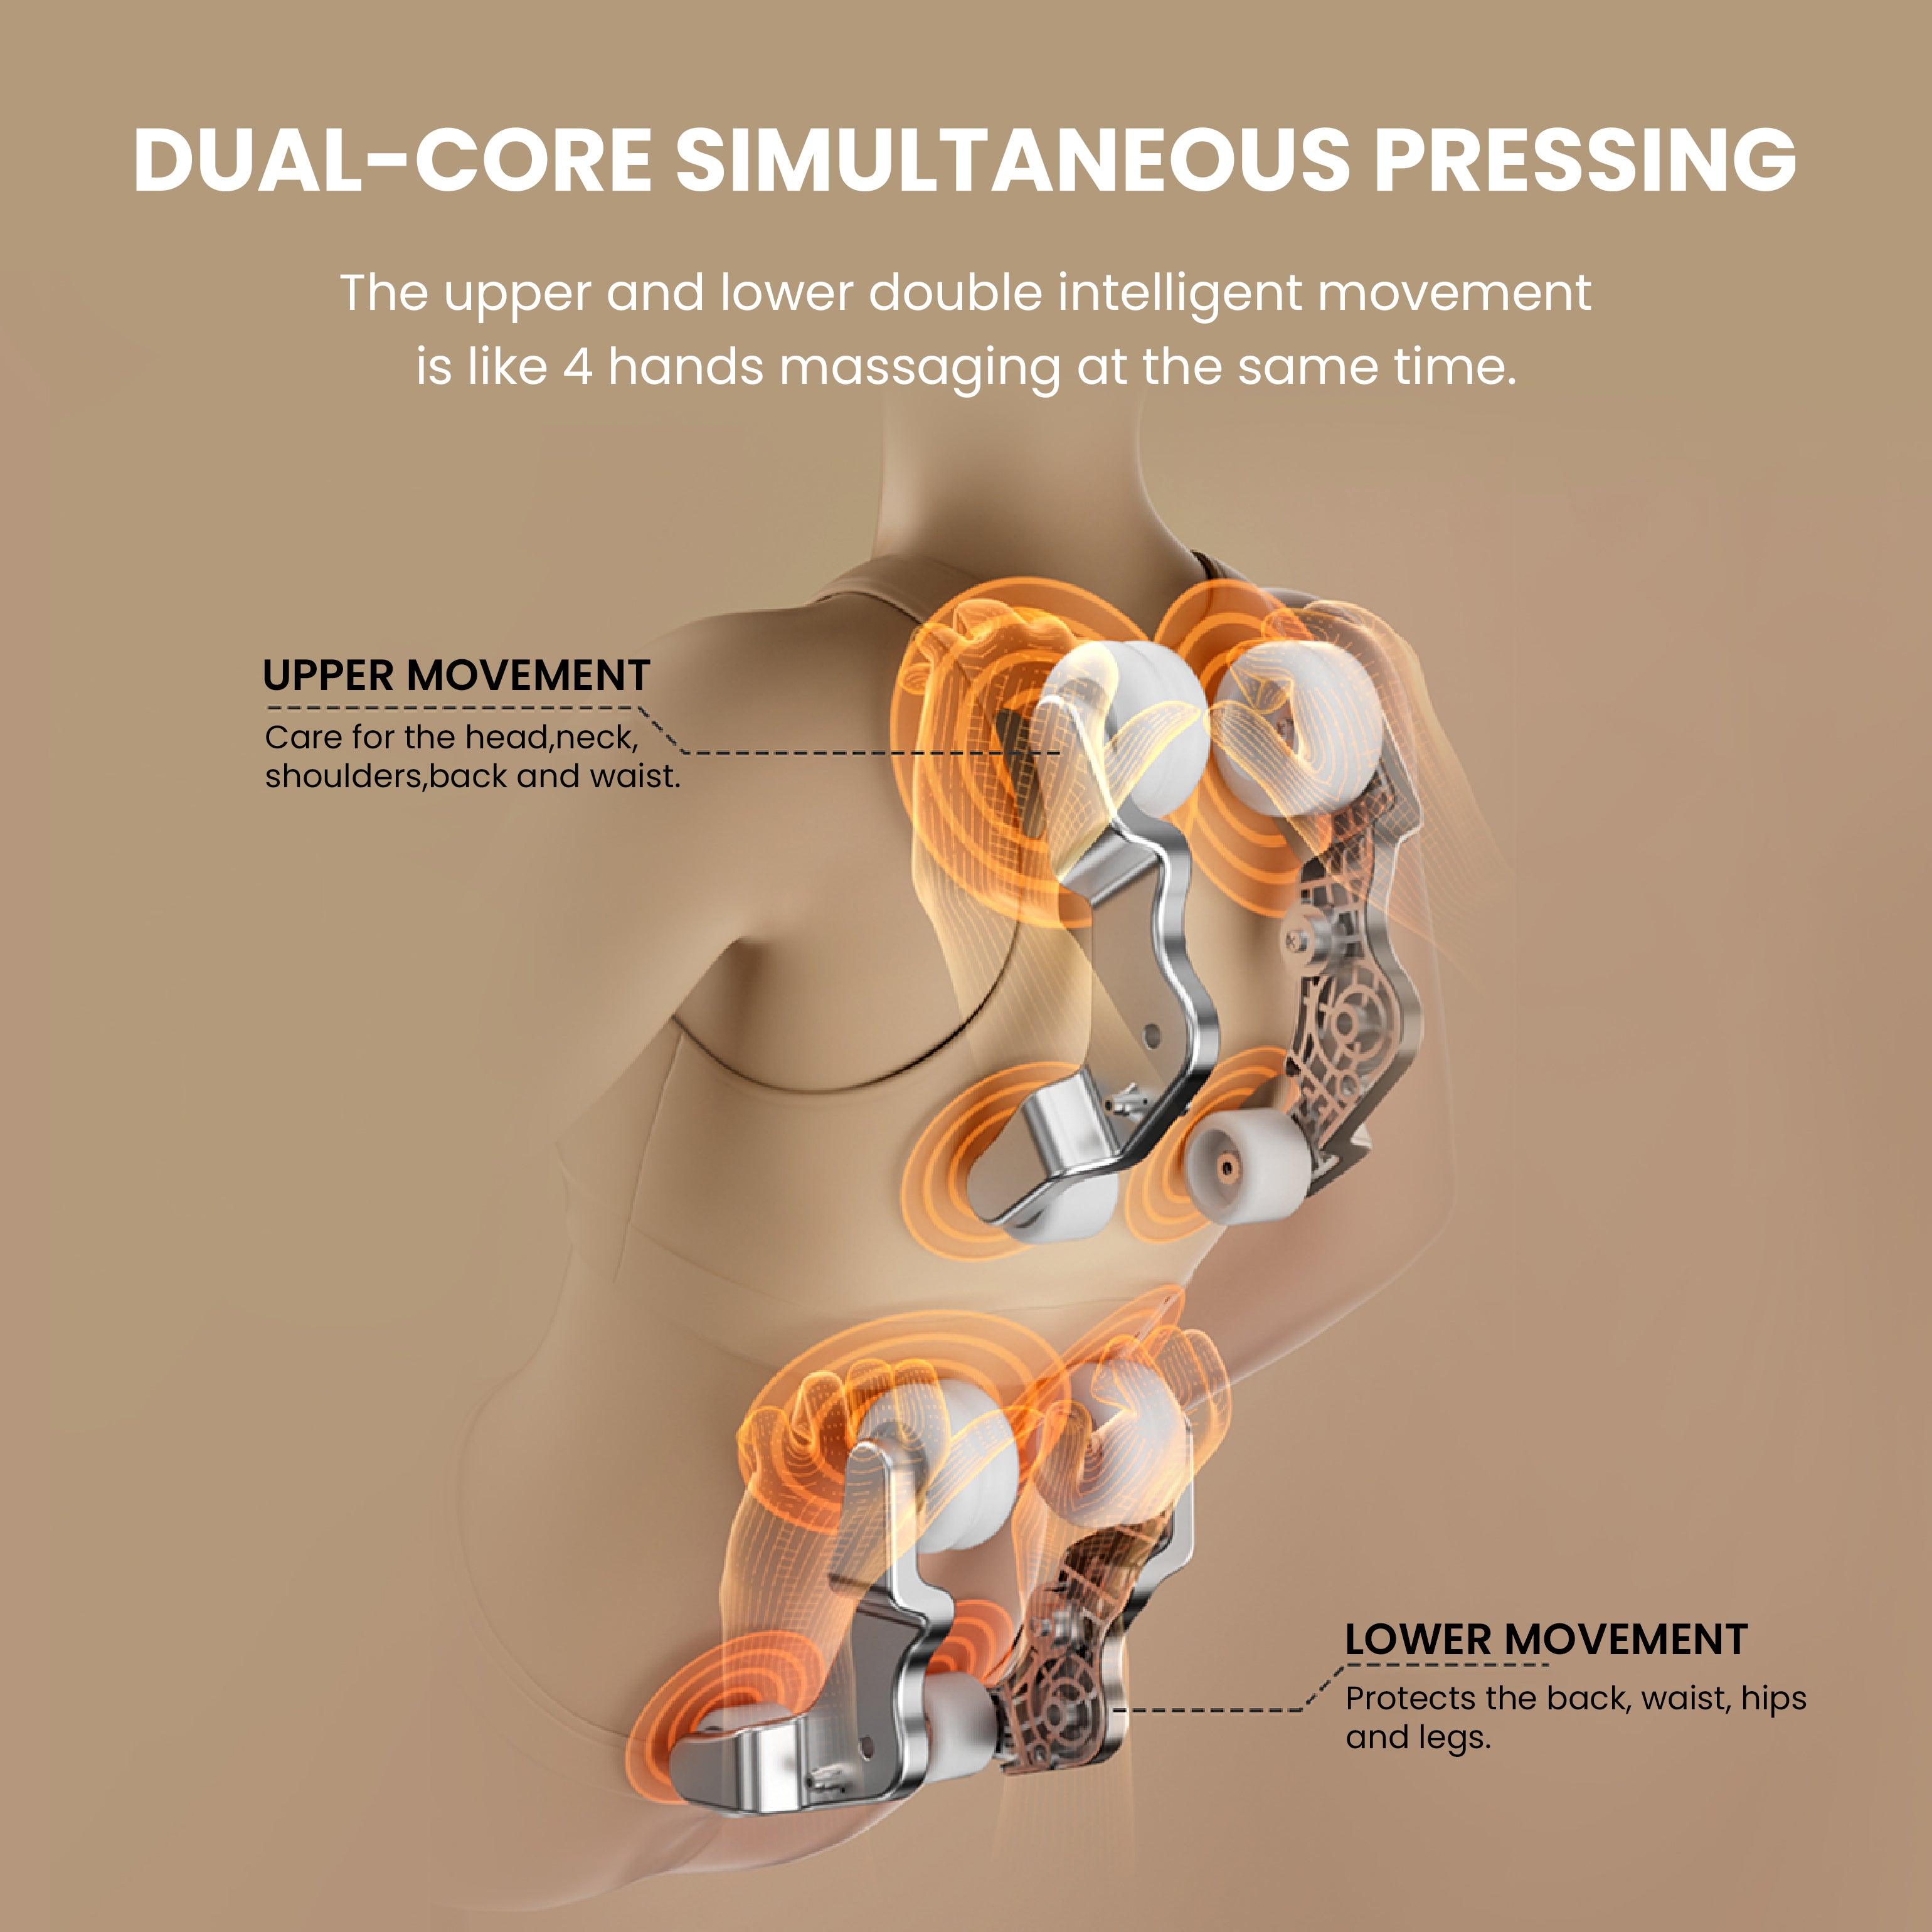 Dual-core simultaneous pressing feature of Royal Magestic Pro Massage Chair demonstrating upper and lower body massage movements